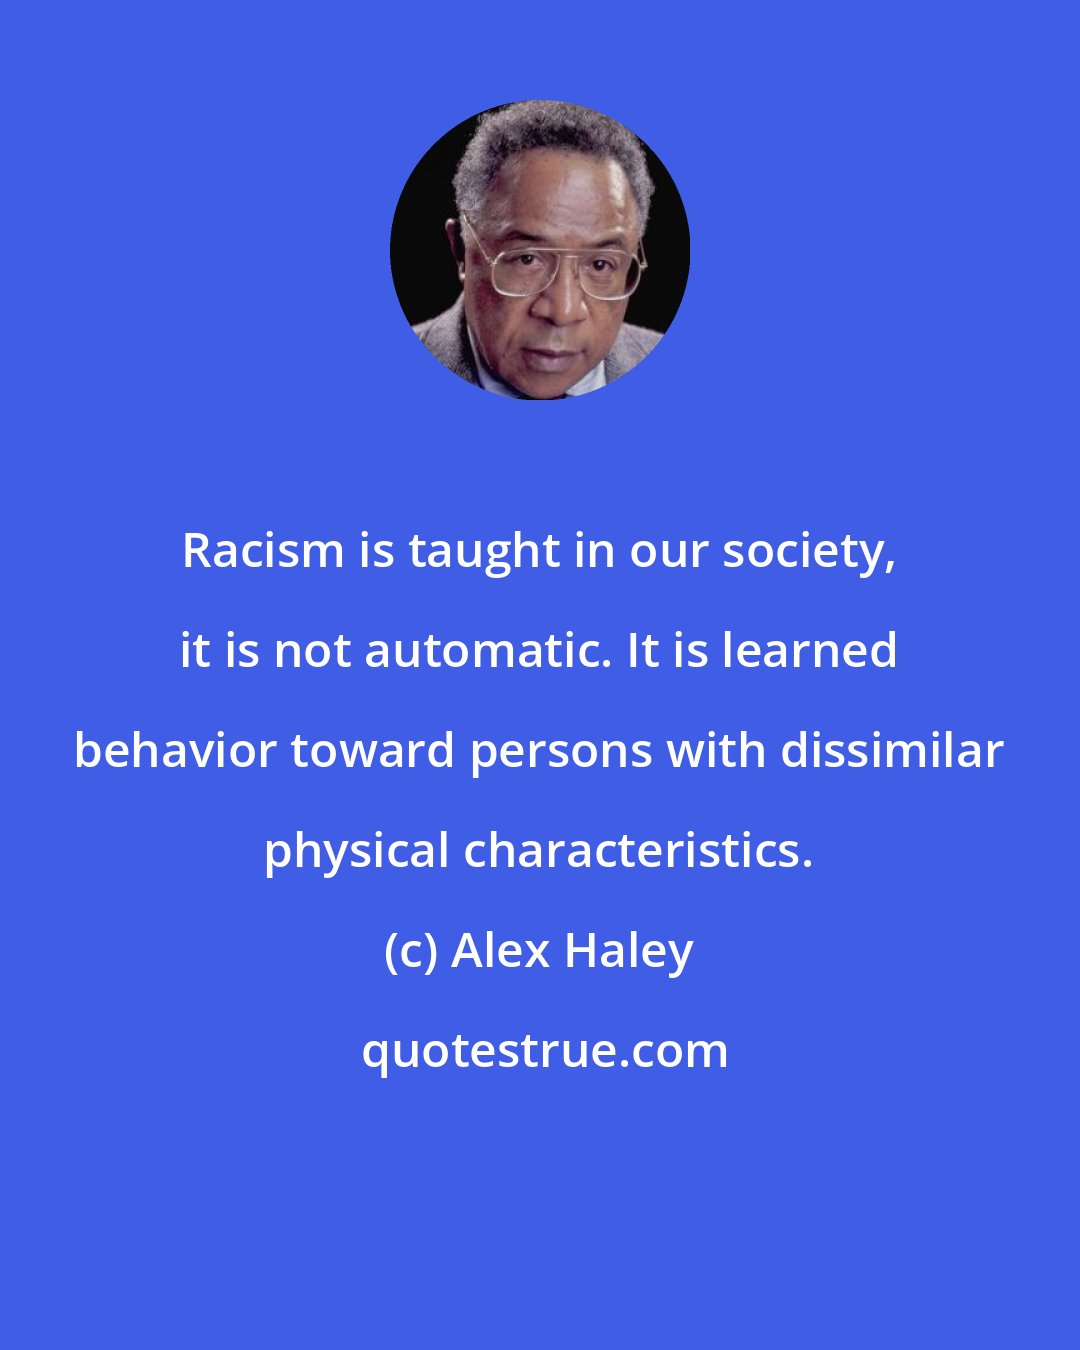 Alex Haley: Racism is taught in our society, it is not automatic. It is learned behavior toward persons with dissimilar physical characteristics.